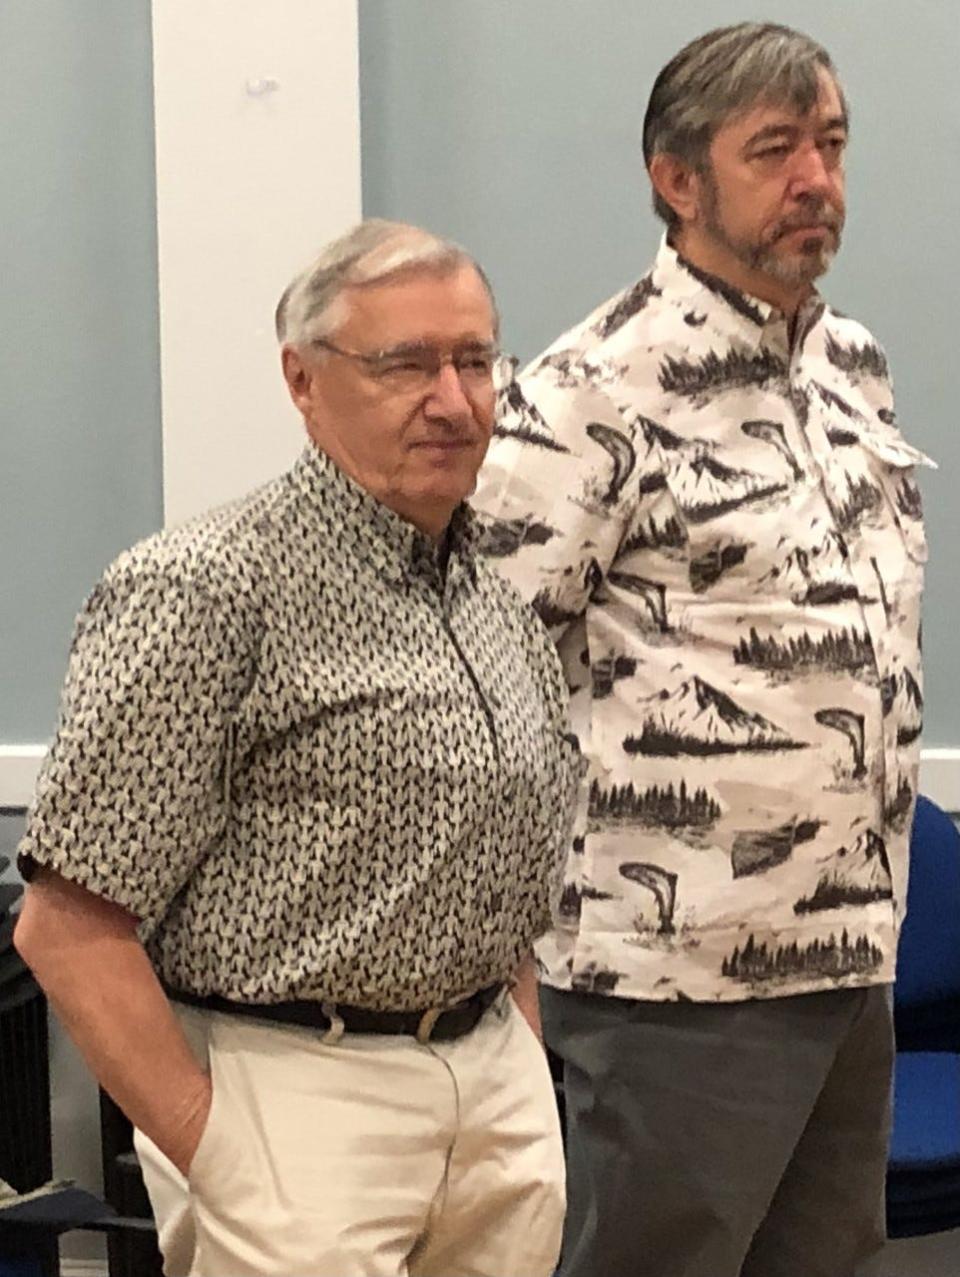 Kevin Neely, left, and David Murphy, of the local Knights of Columbus, were instrumental in working with Mary Gannaway to help renovate a Sanford, Maine man's home in the summer of 2021. Here, they are seen at the Sanford-Springvale Rotary Club's meeting at the Nasson Little Theatre on June 9, 2022.